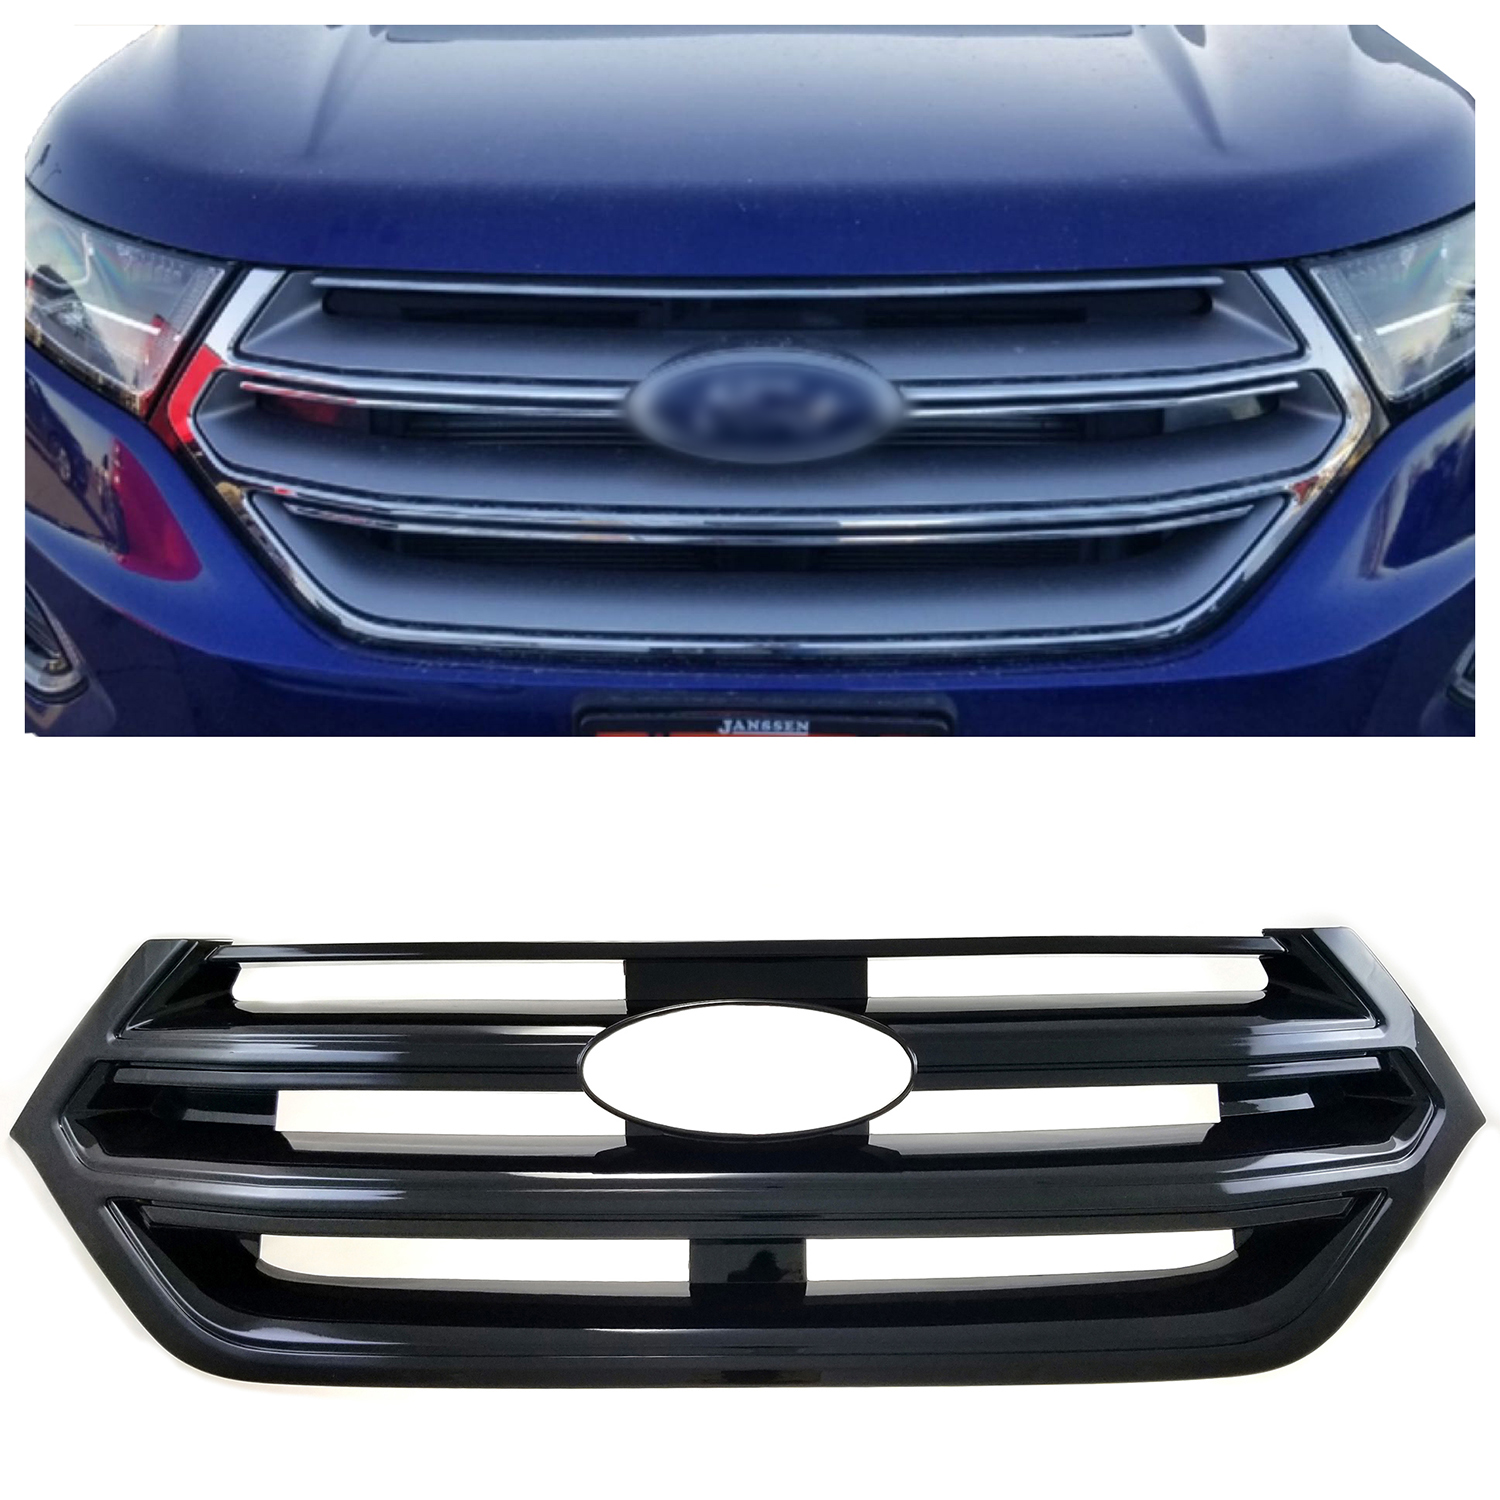 Gloss Black Patented Grille Overlay for Ford Taurus